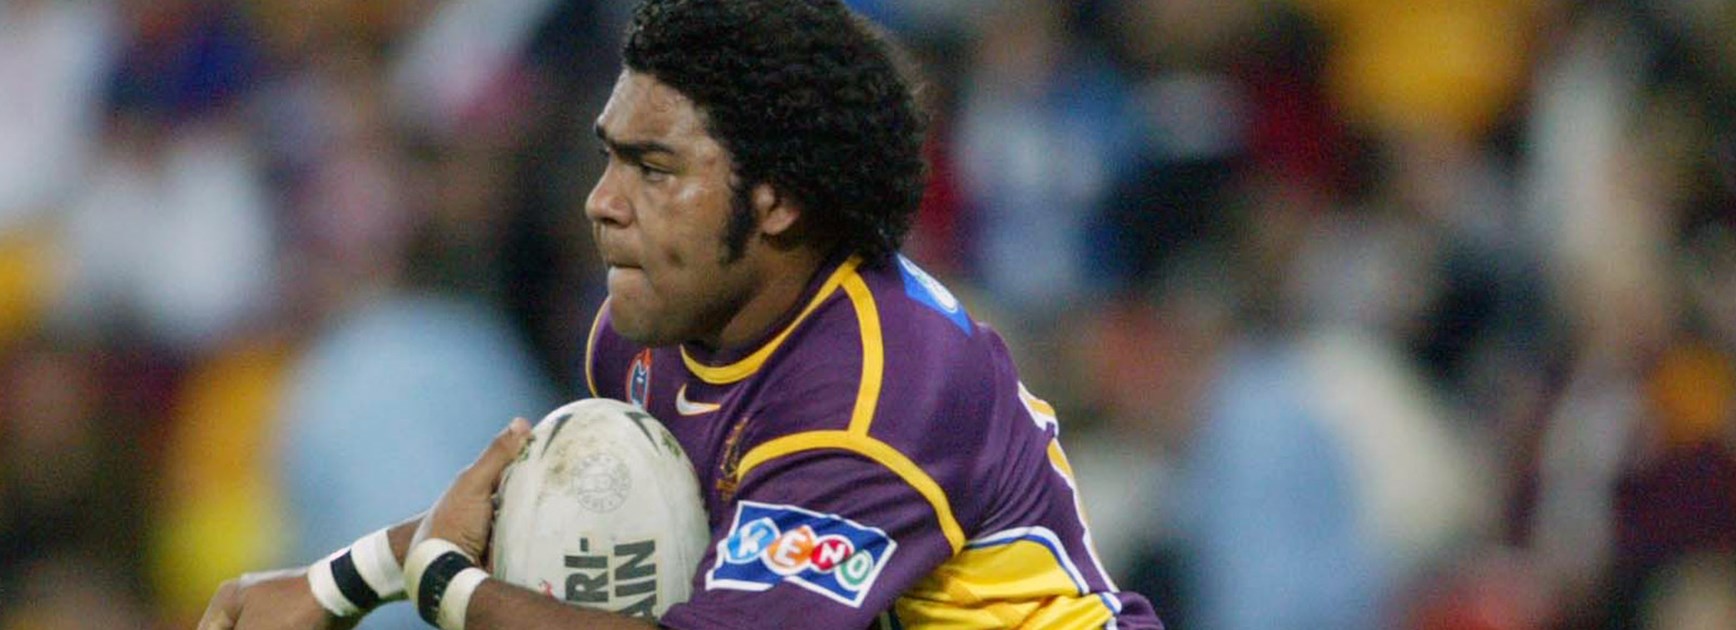 Sam Thaiday made his NRL debut against the Bulldogs in Round 18, 2003.